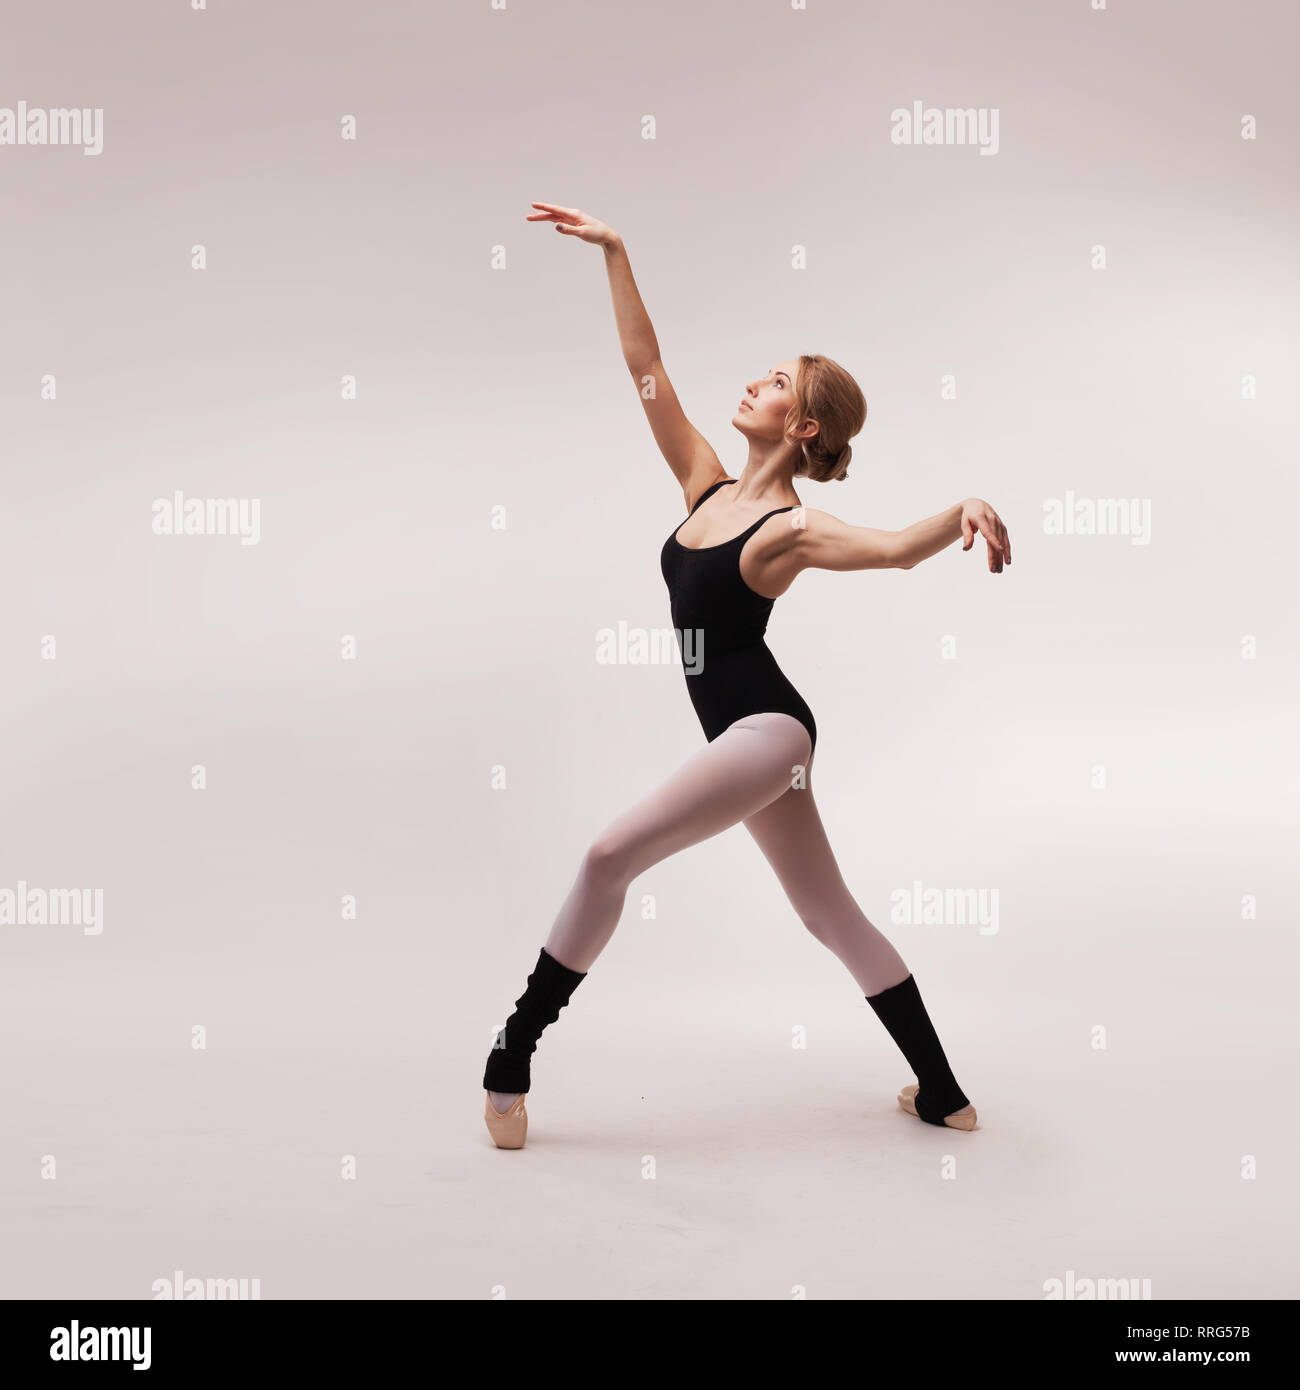 Ballerina in black outfit posing on toes Stock Photo